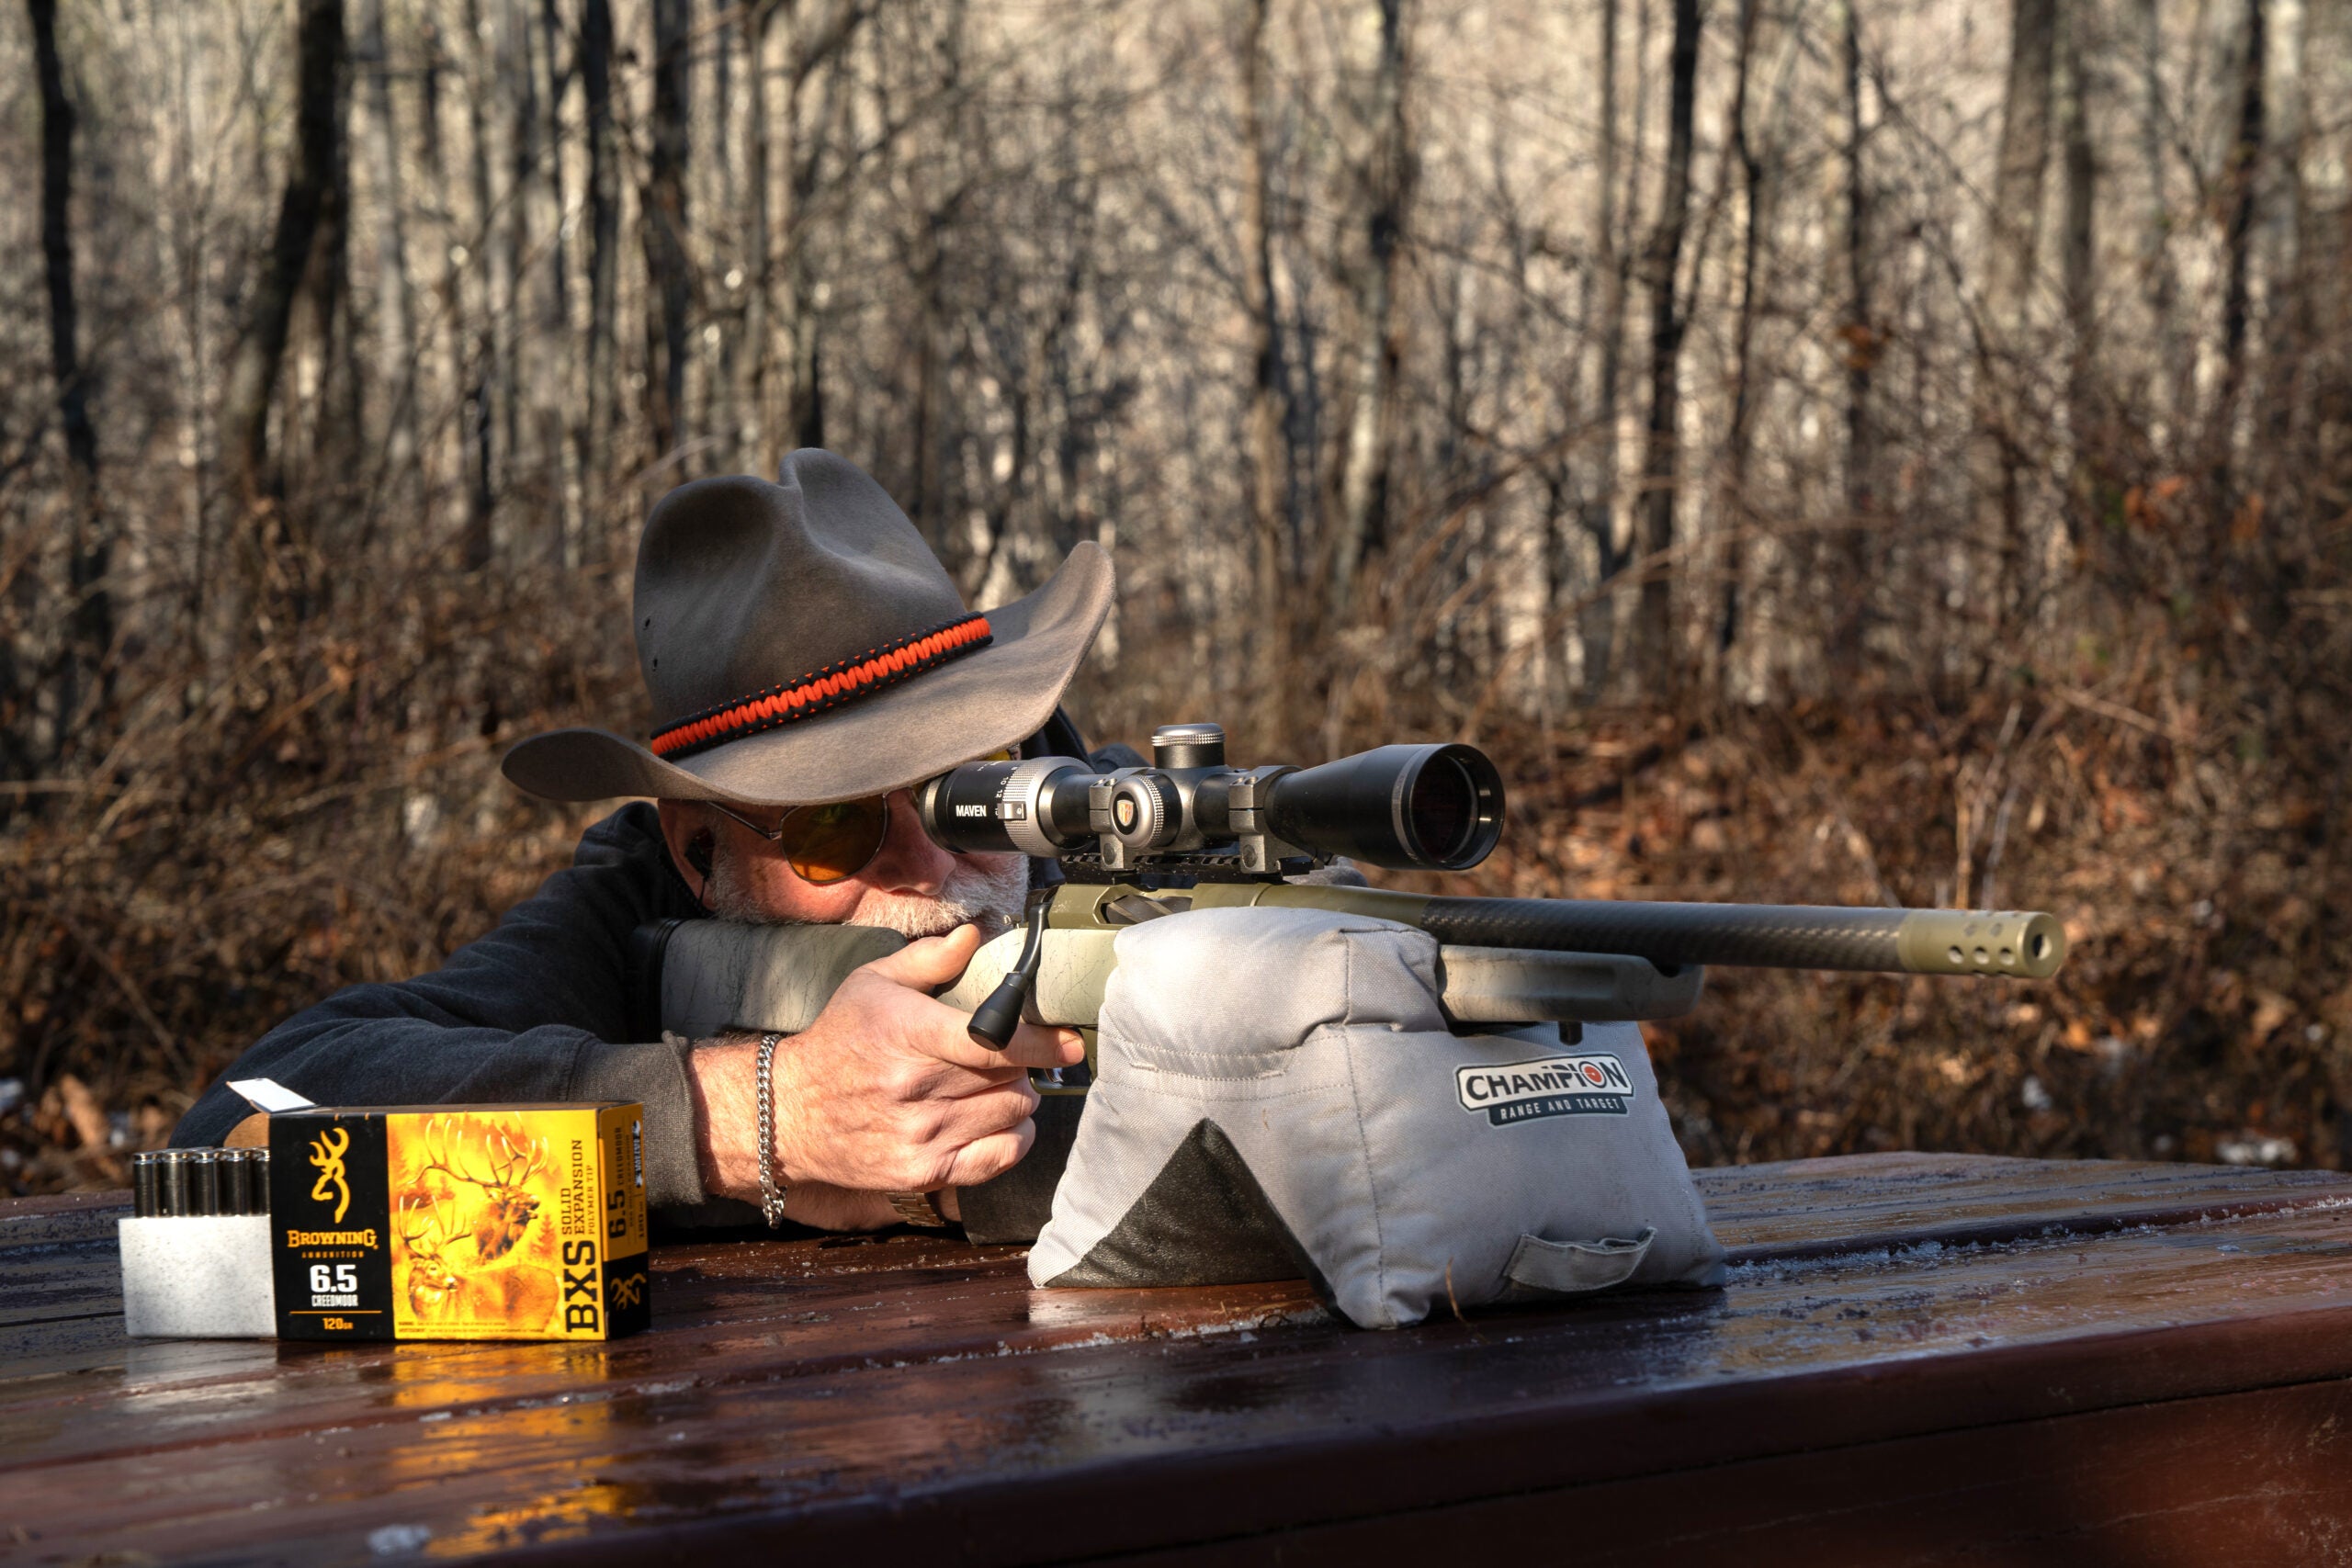 Shooter in cowboy hat fires the Springfield Armory Model 2020 Redline rifle from a bench rest